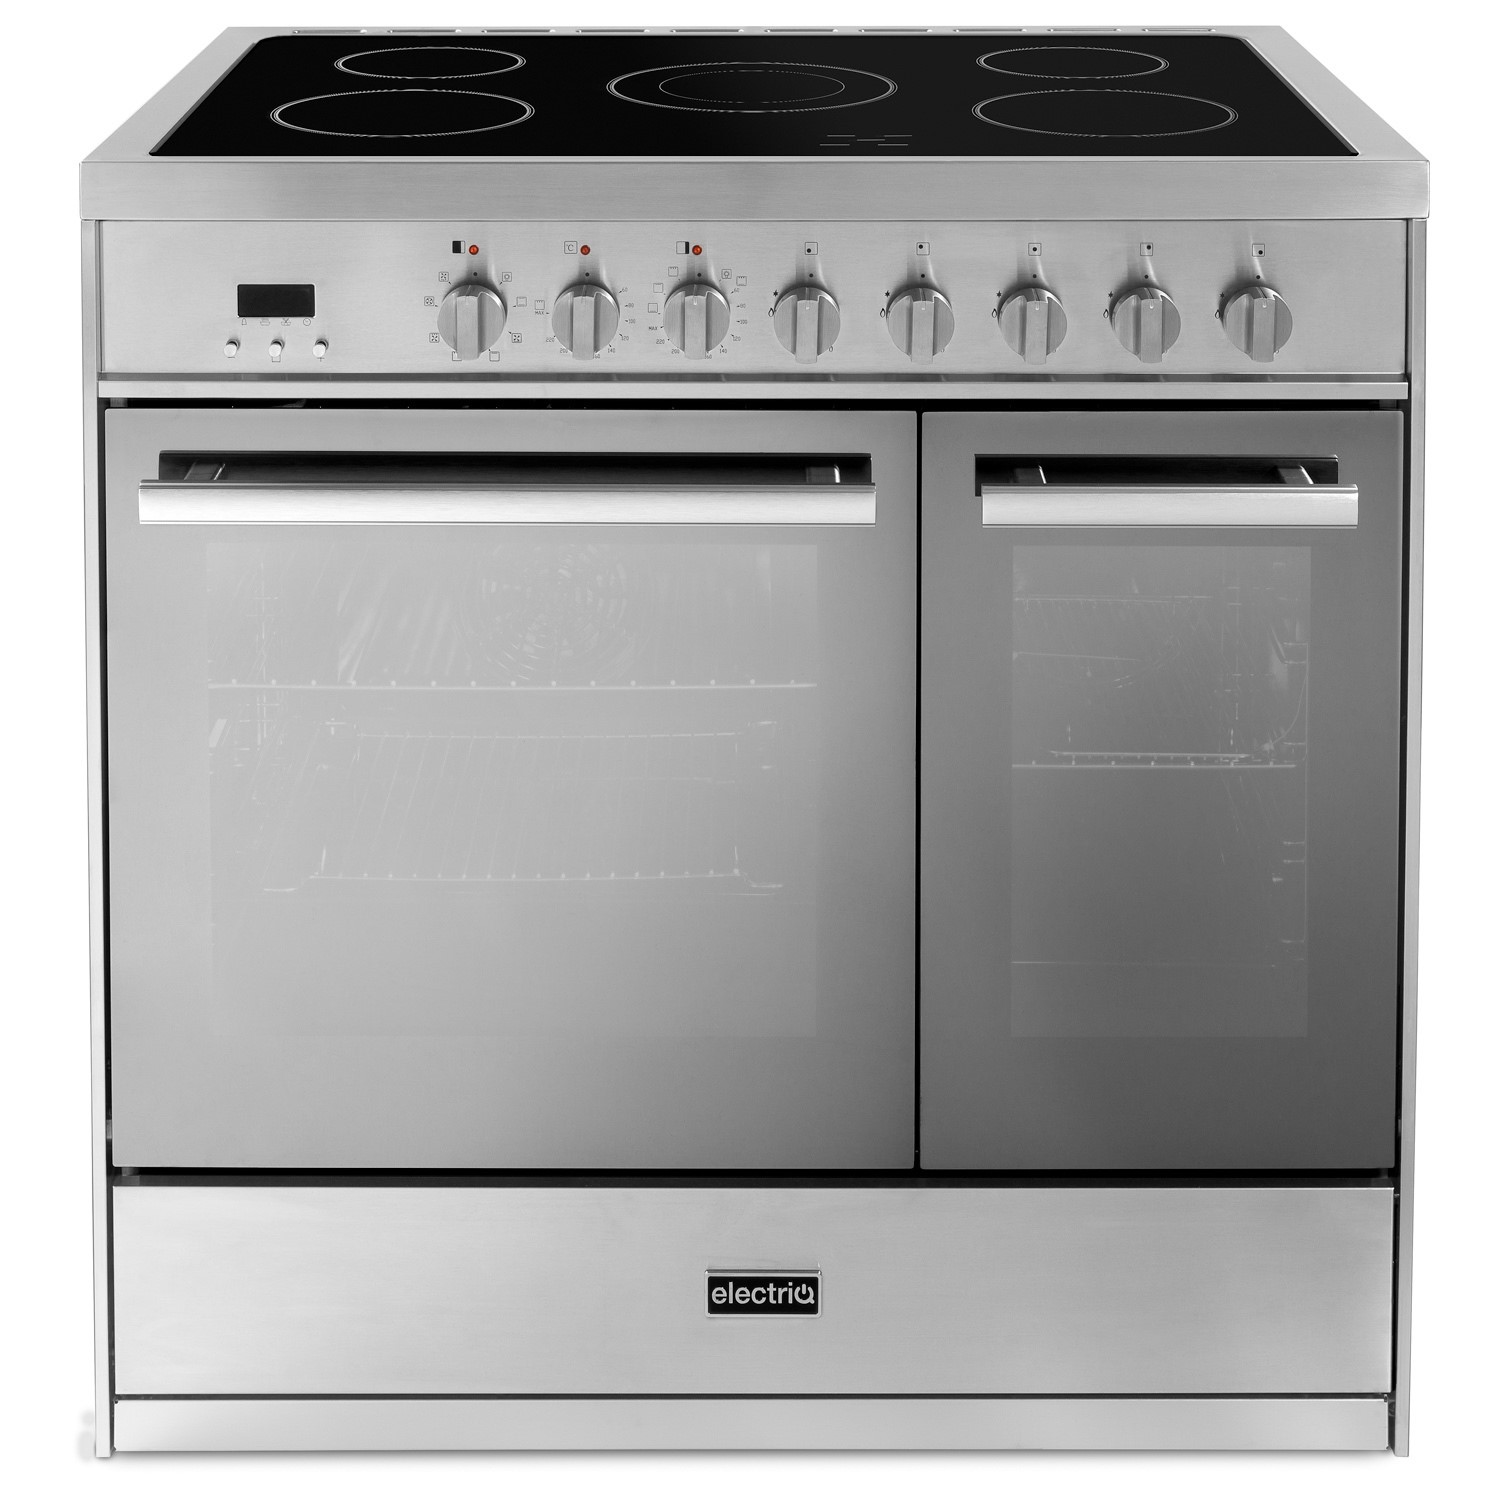 electriQ 90cm Electric Range Cooker - Mirror Finish Stainless Steel